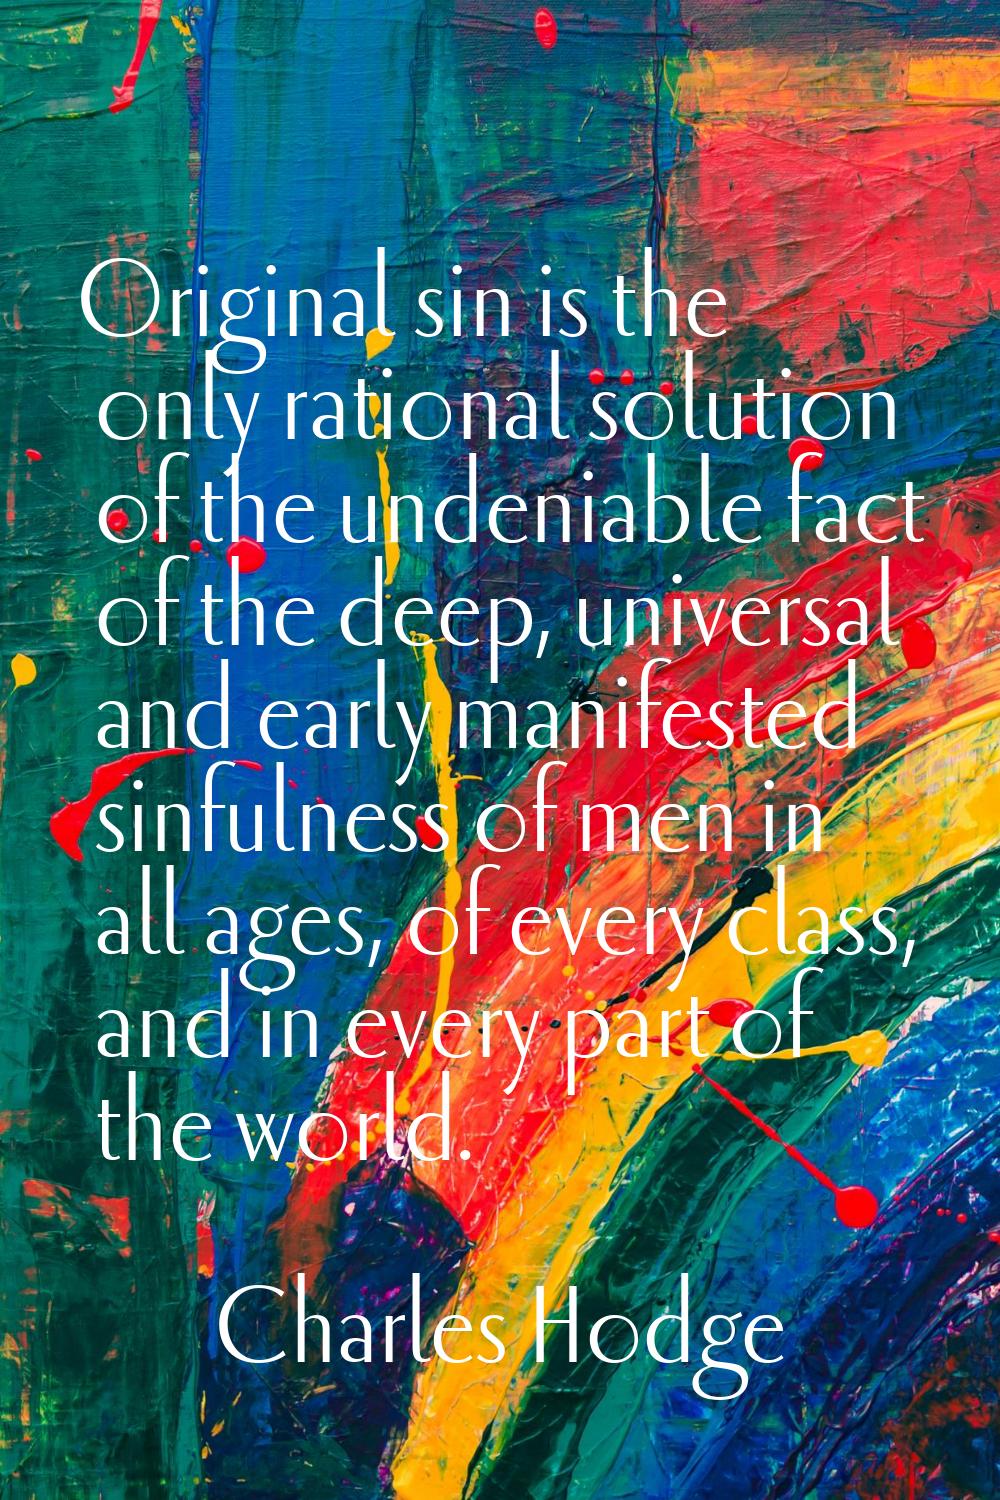 Original sin is the only rational solution of the undeniable fact of the deep, universal and early 